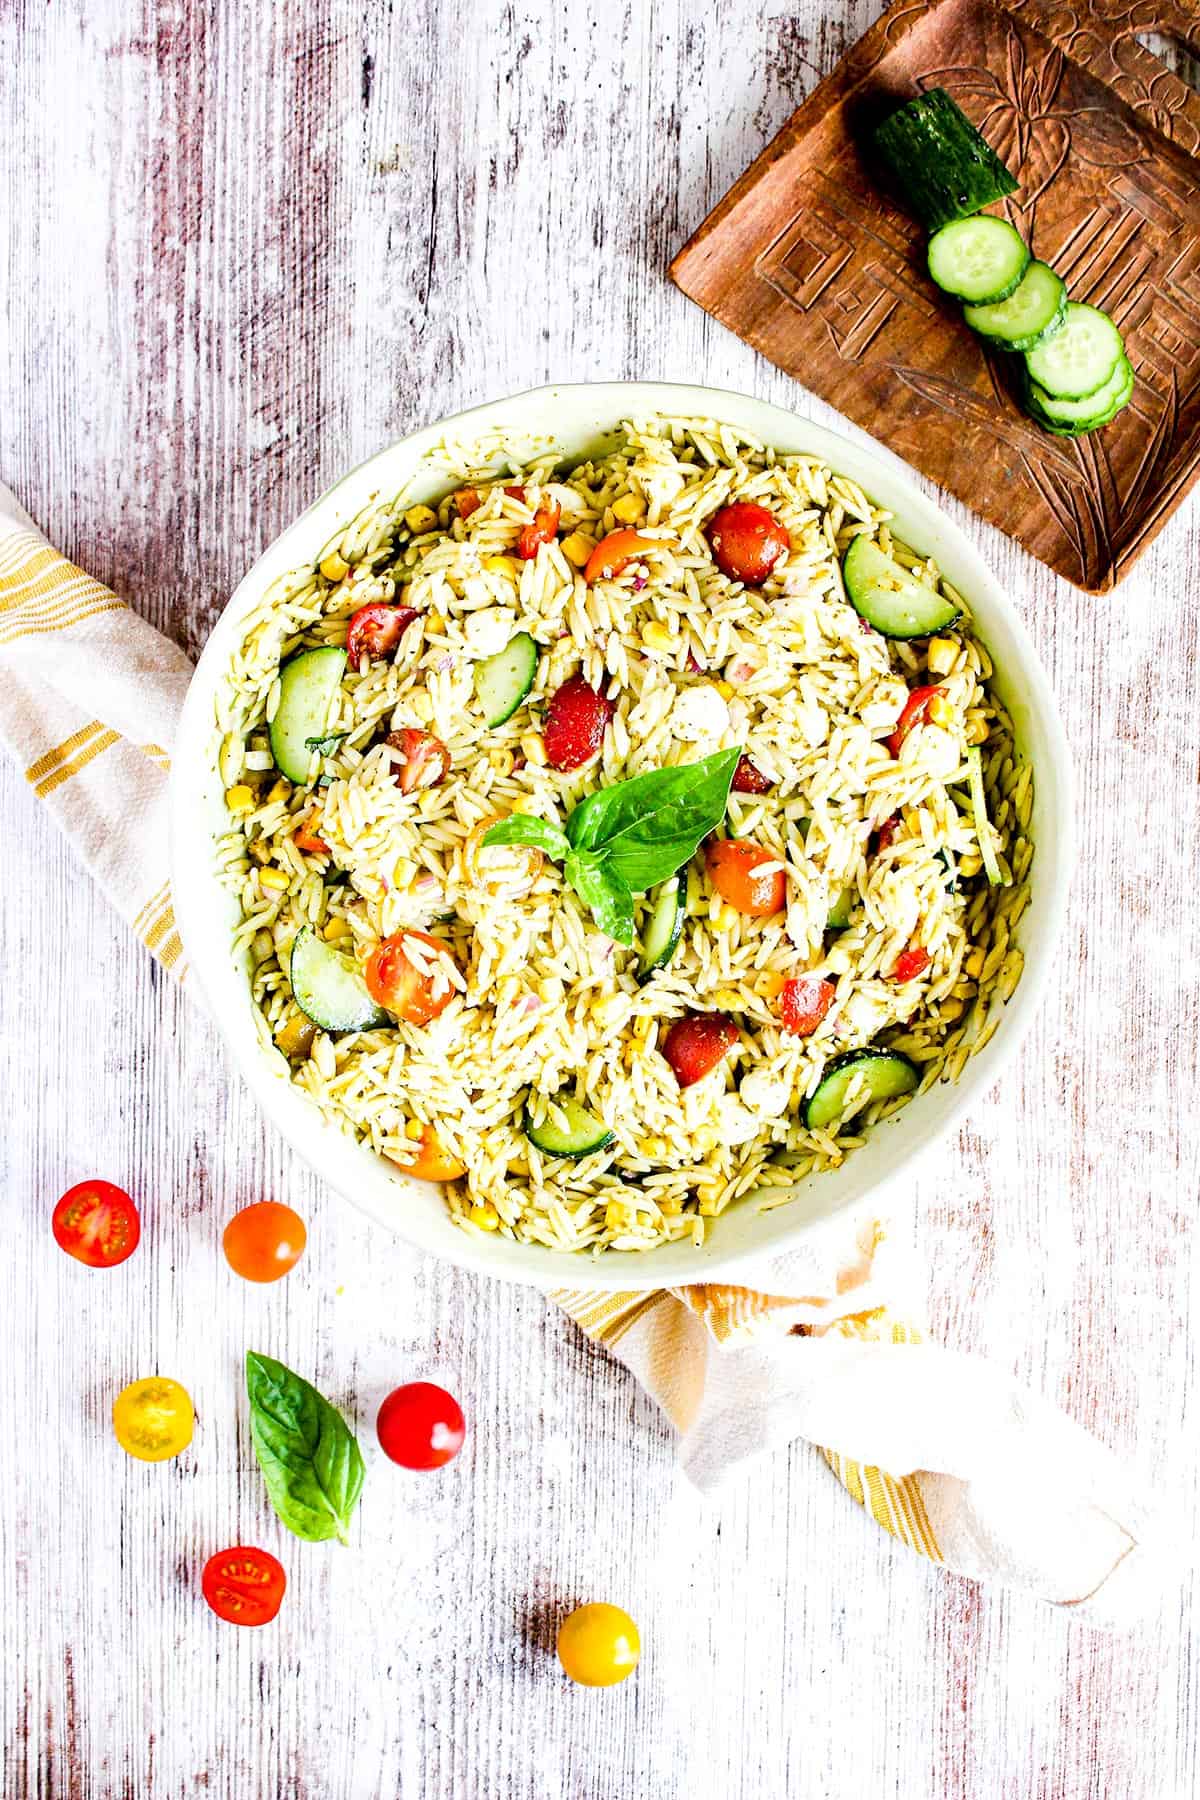 Serving bowl of pesto orzo salad with cherry tomatoes and sliced cucumber.